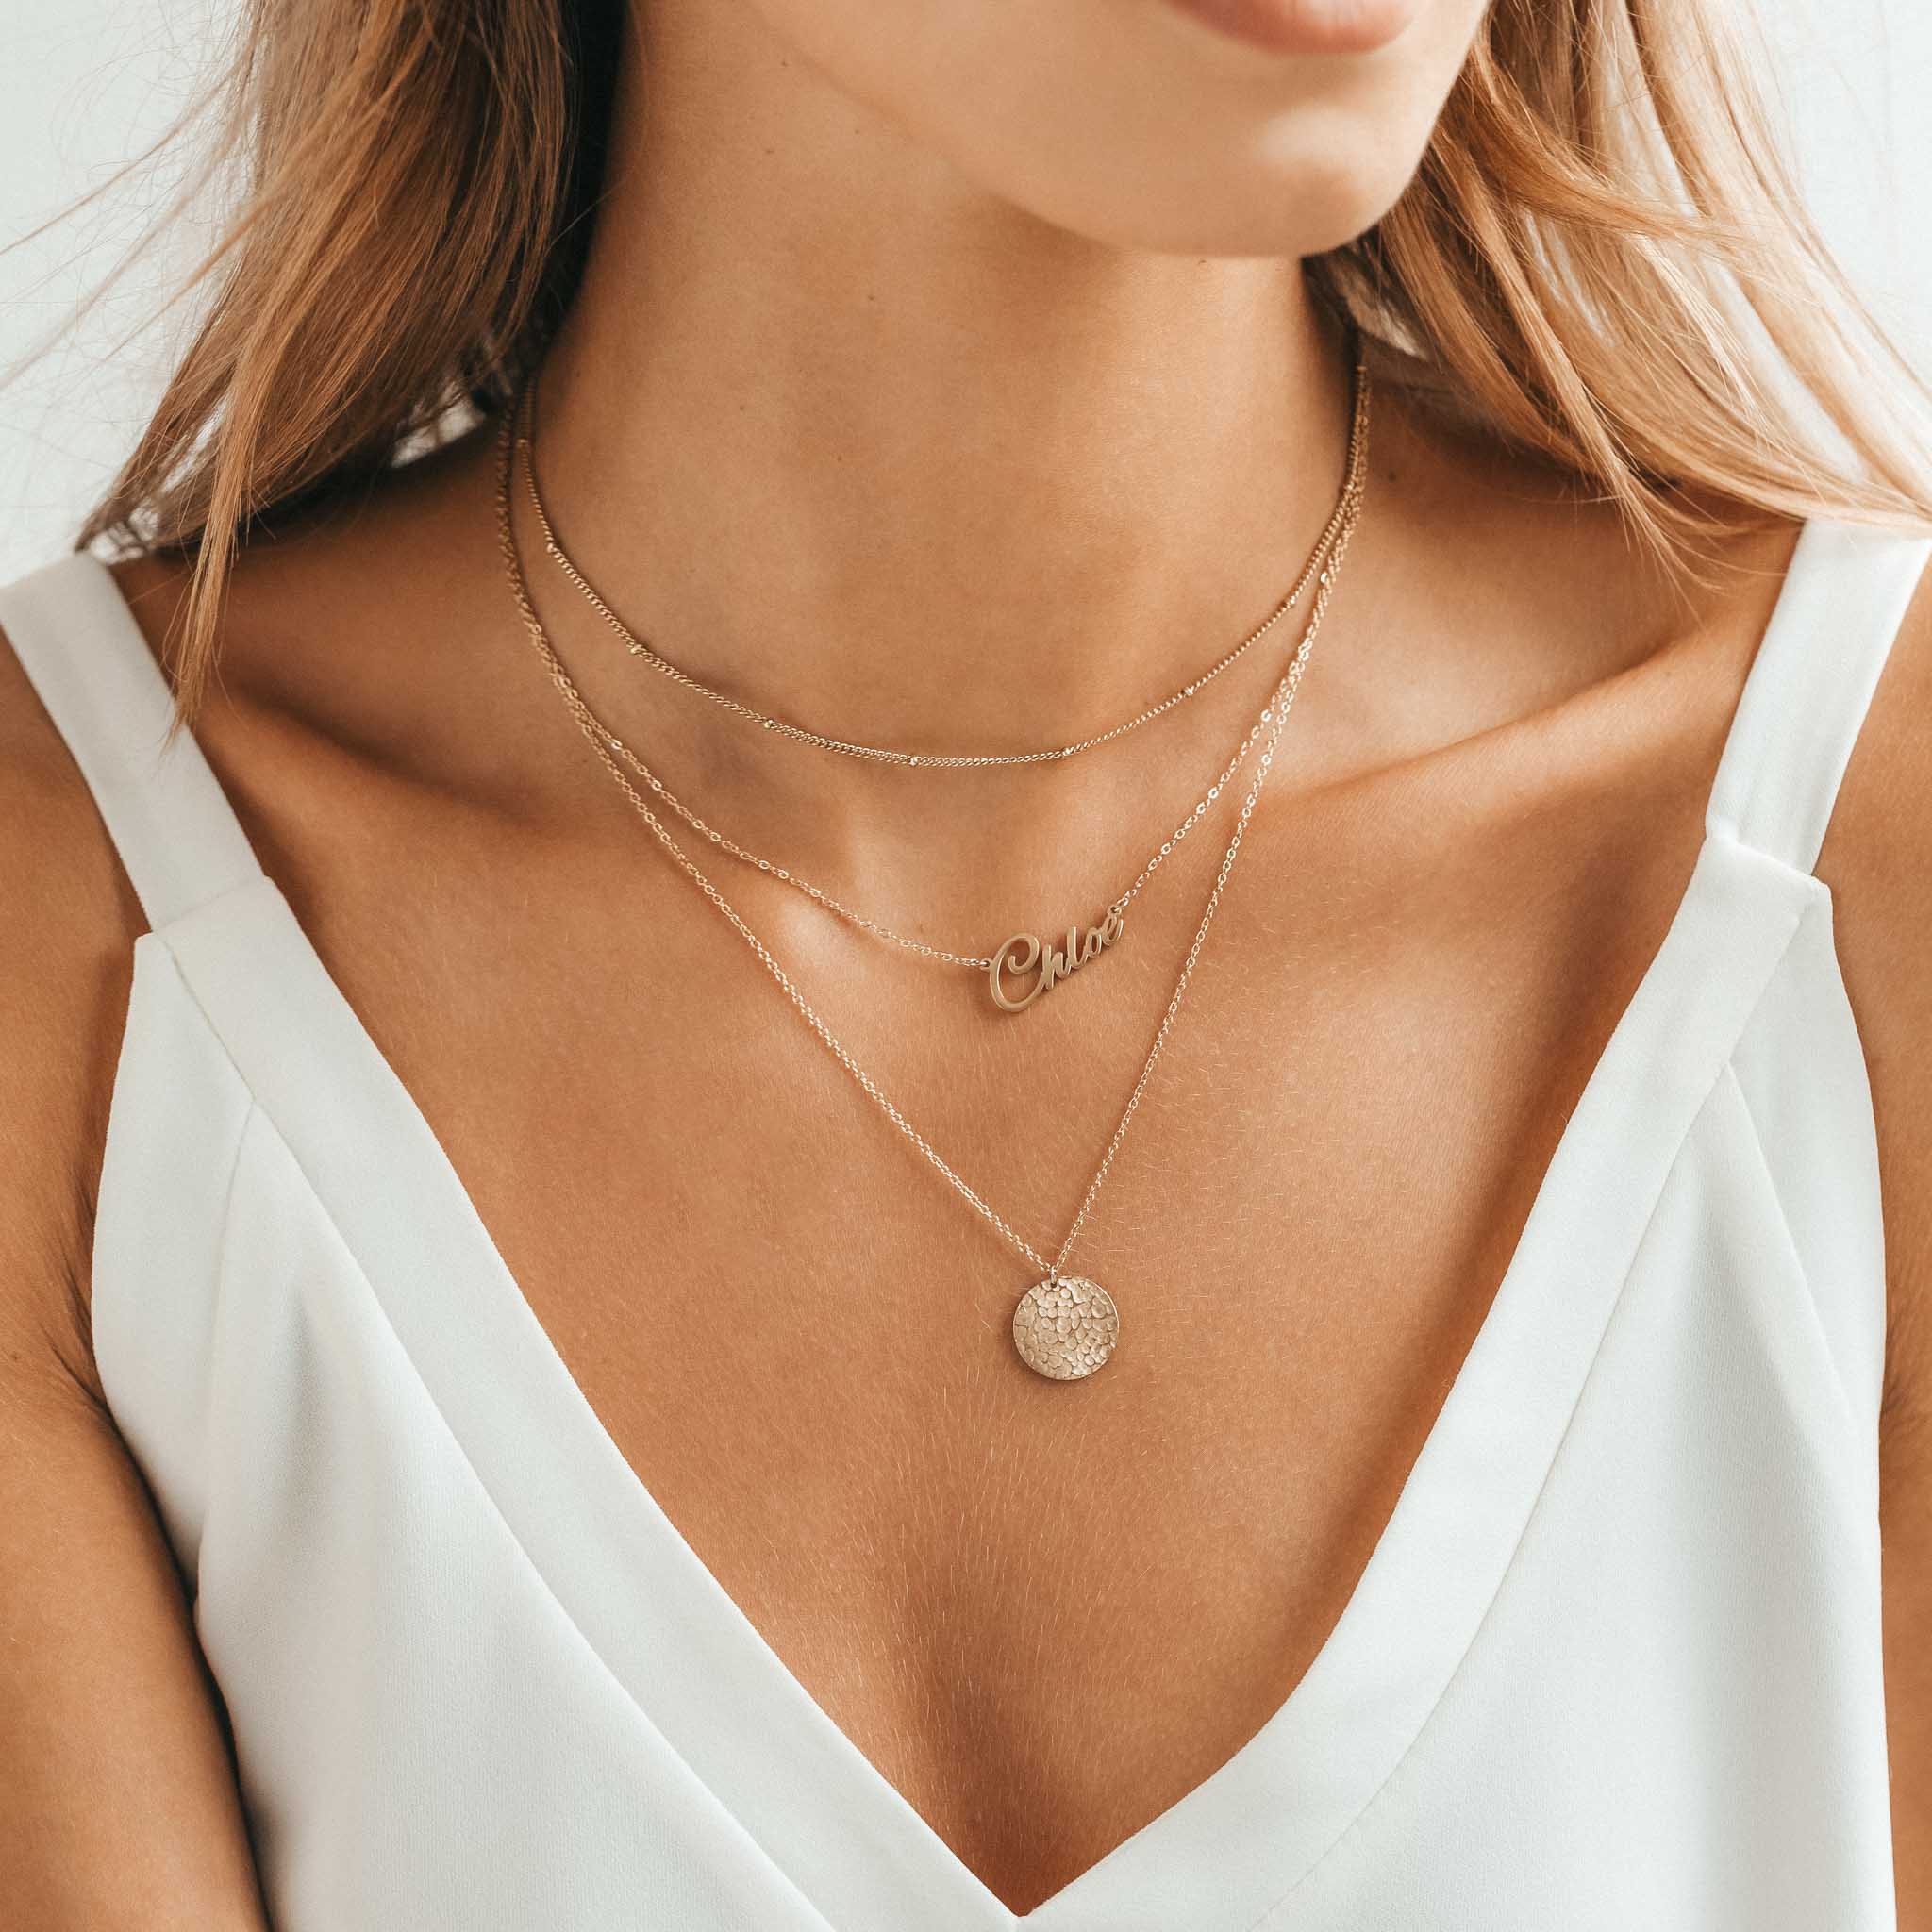 Learn the Art of Necklace Layering | Kendra Scott